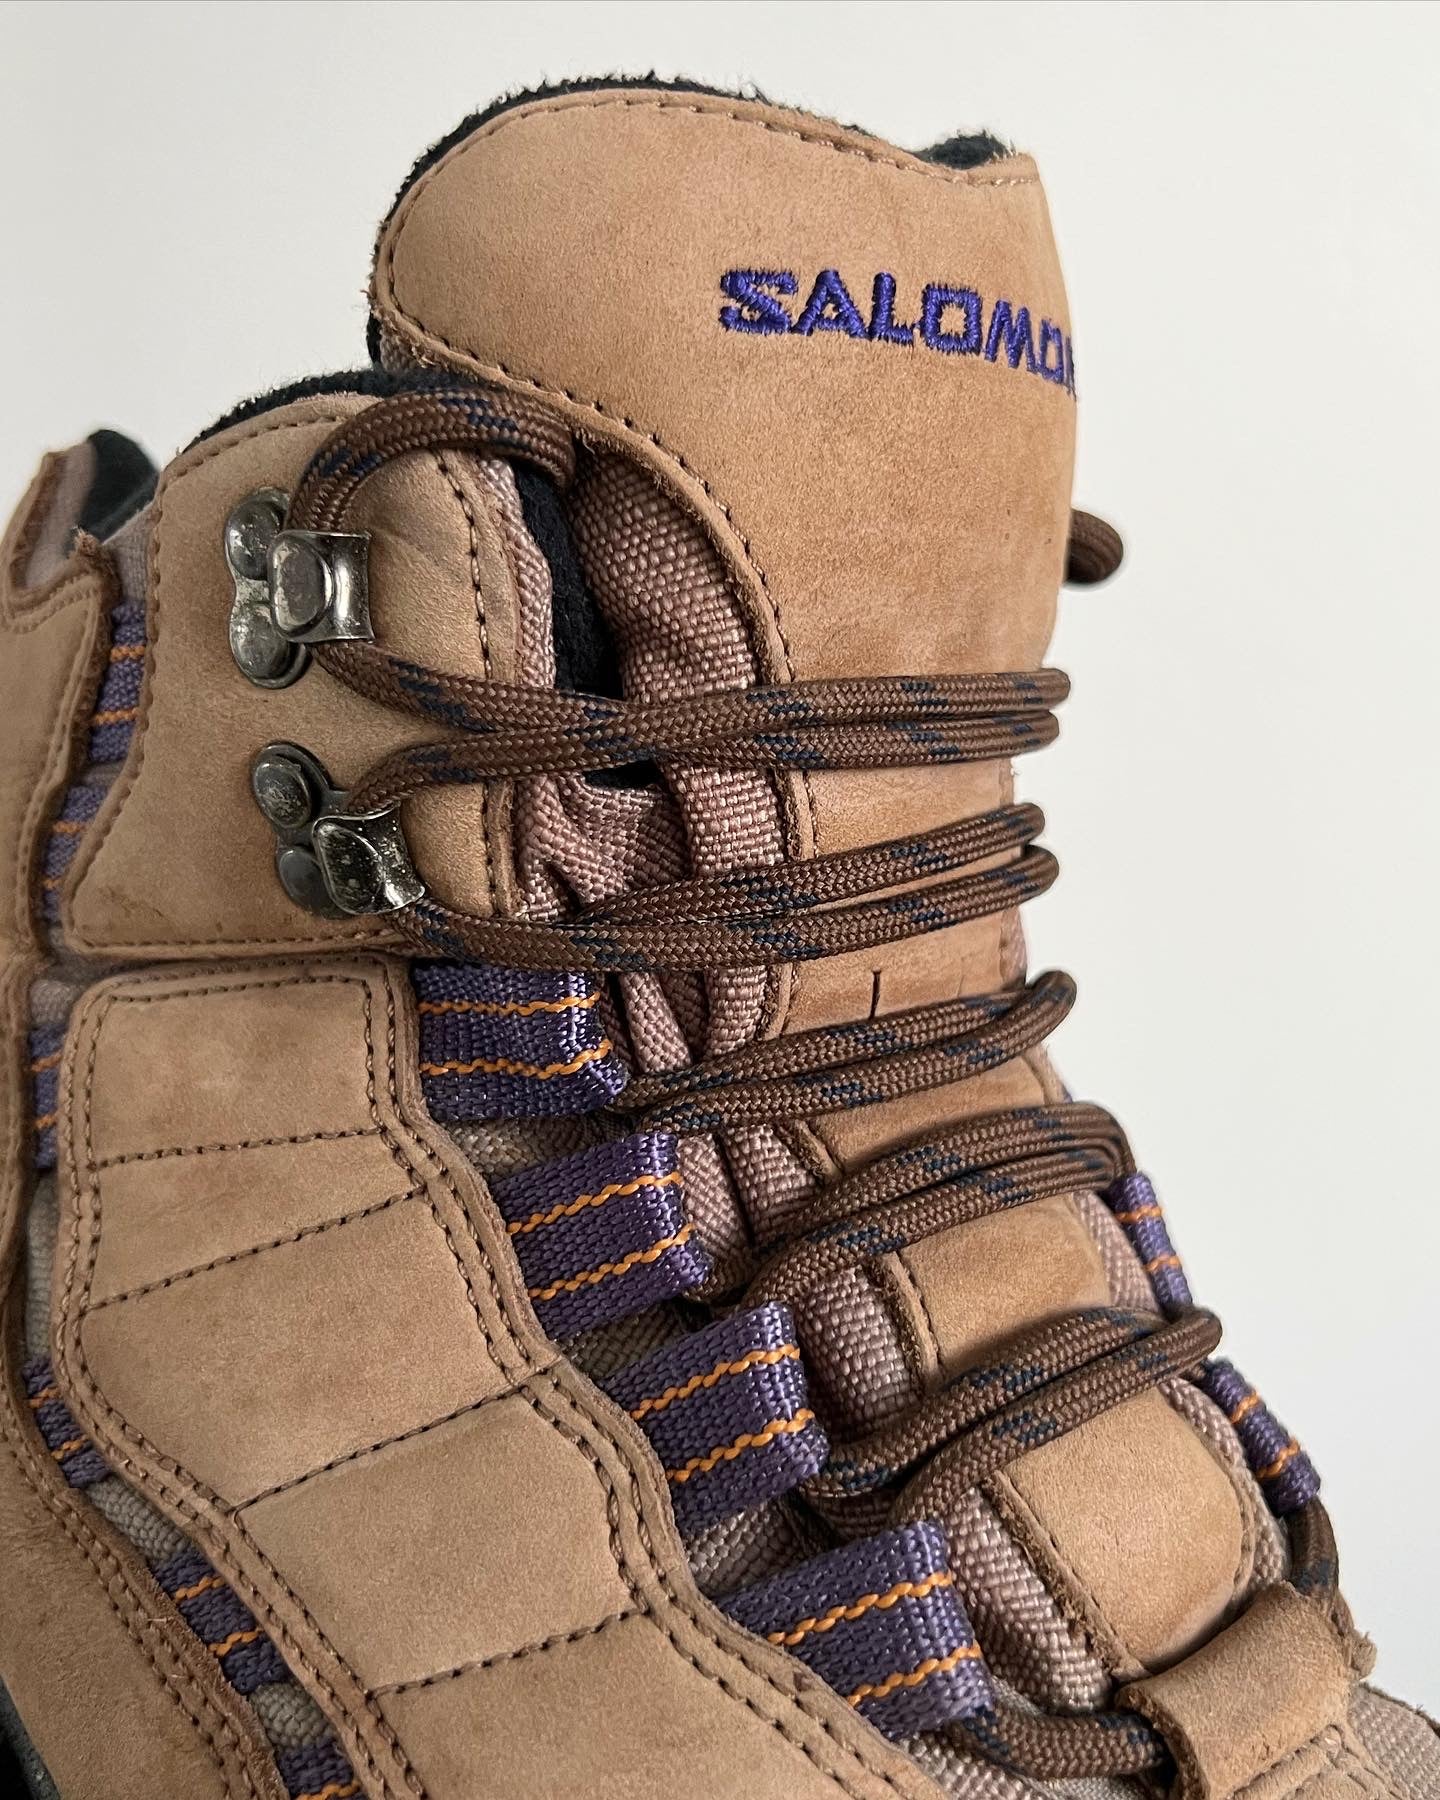 Salomon Early 2000s Vintage Contagrip Rugged Sole Boots - A pair of Salomon boots that have defied time, being more popular now than ever before. The boots feature a suede upper, with contrasting purple groves, a heel tab and boot lock toe. Overall an iconic pair of Salomons great for the outdoors or urban environments